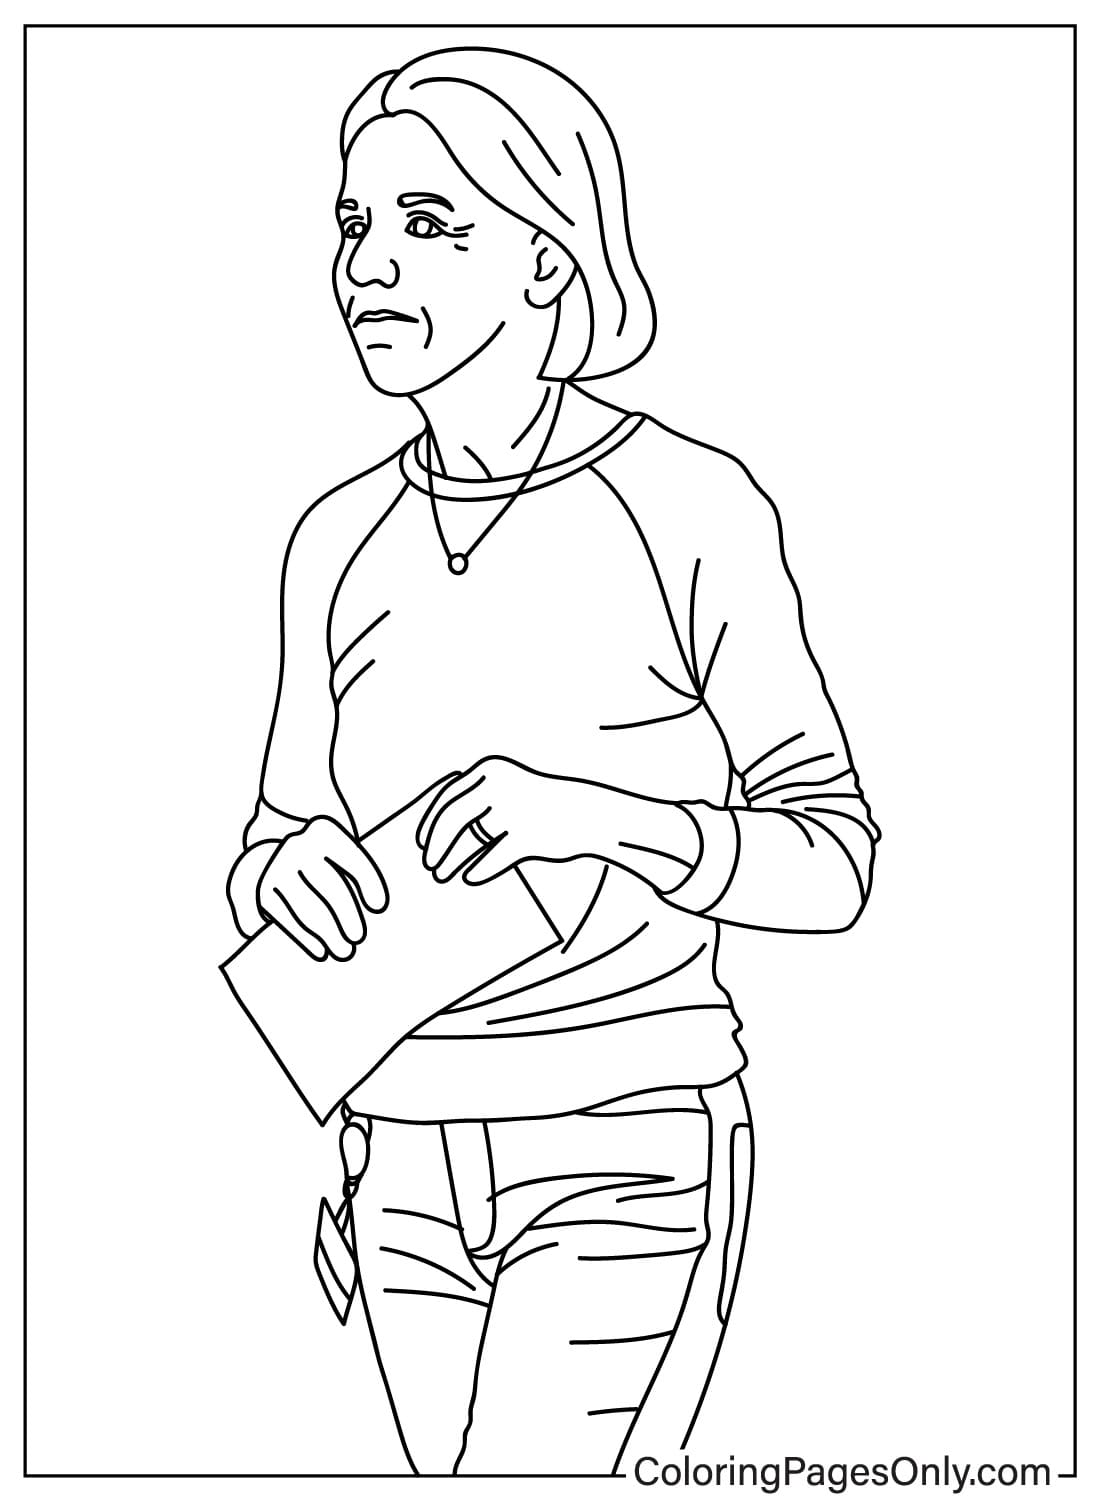 Sheila Ford Hamp Coloring Page from Detroit Lions